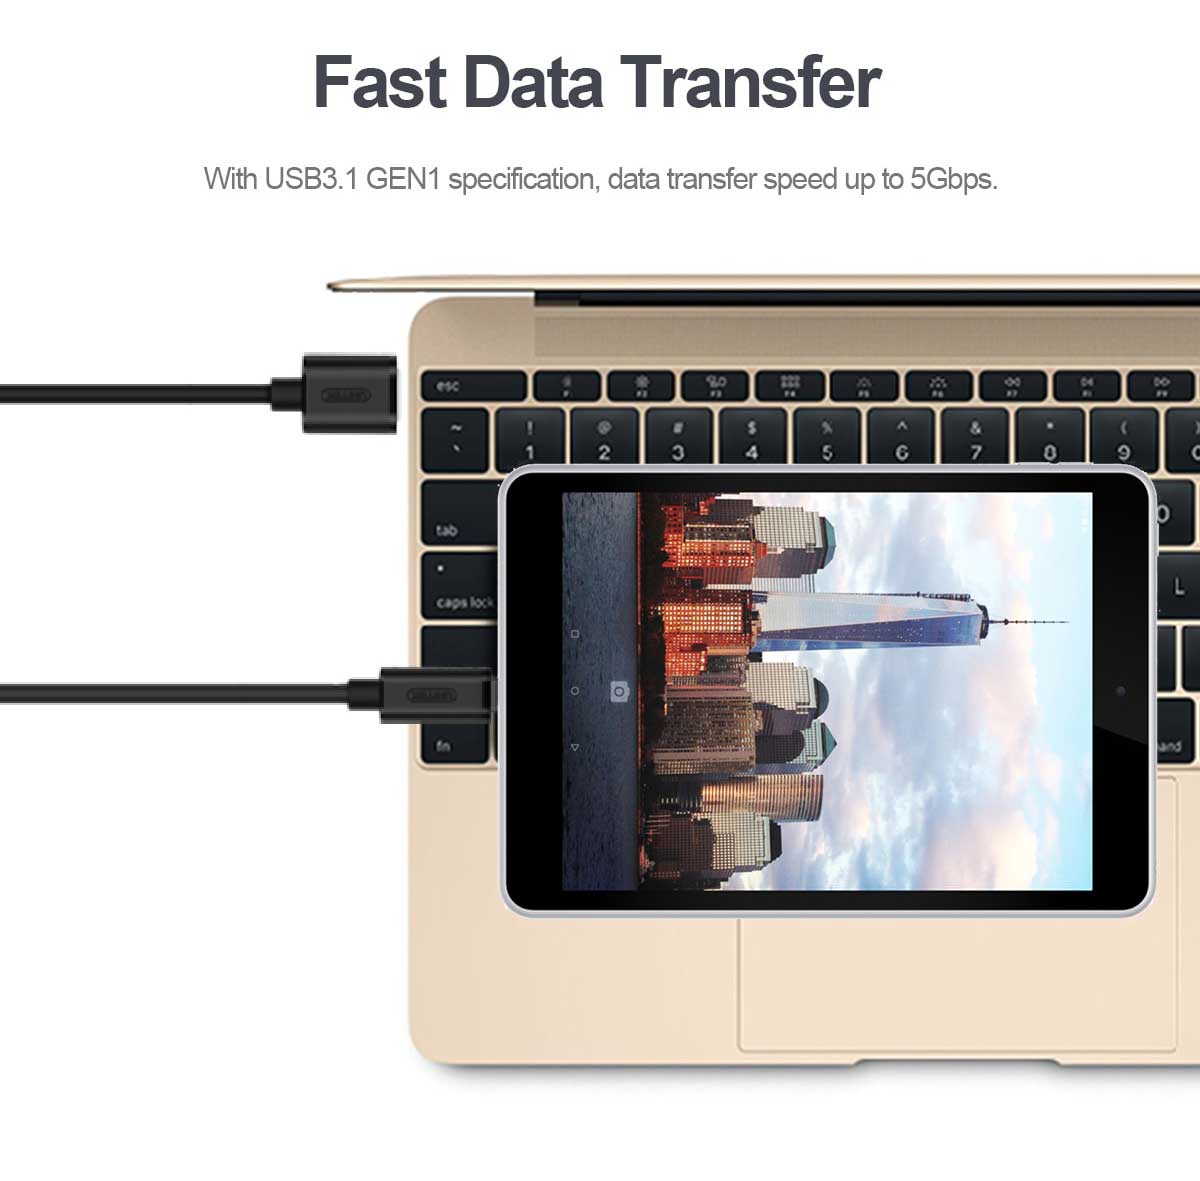 Fast Data Transfer. With USB 3.1 Gen1 specification, data transfer speed up to 5Gbps.